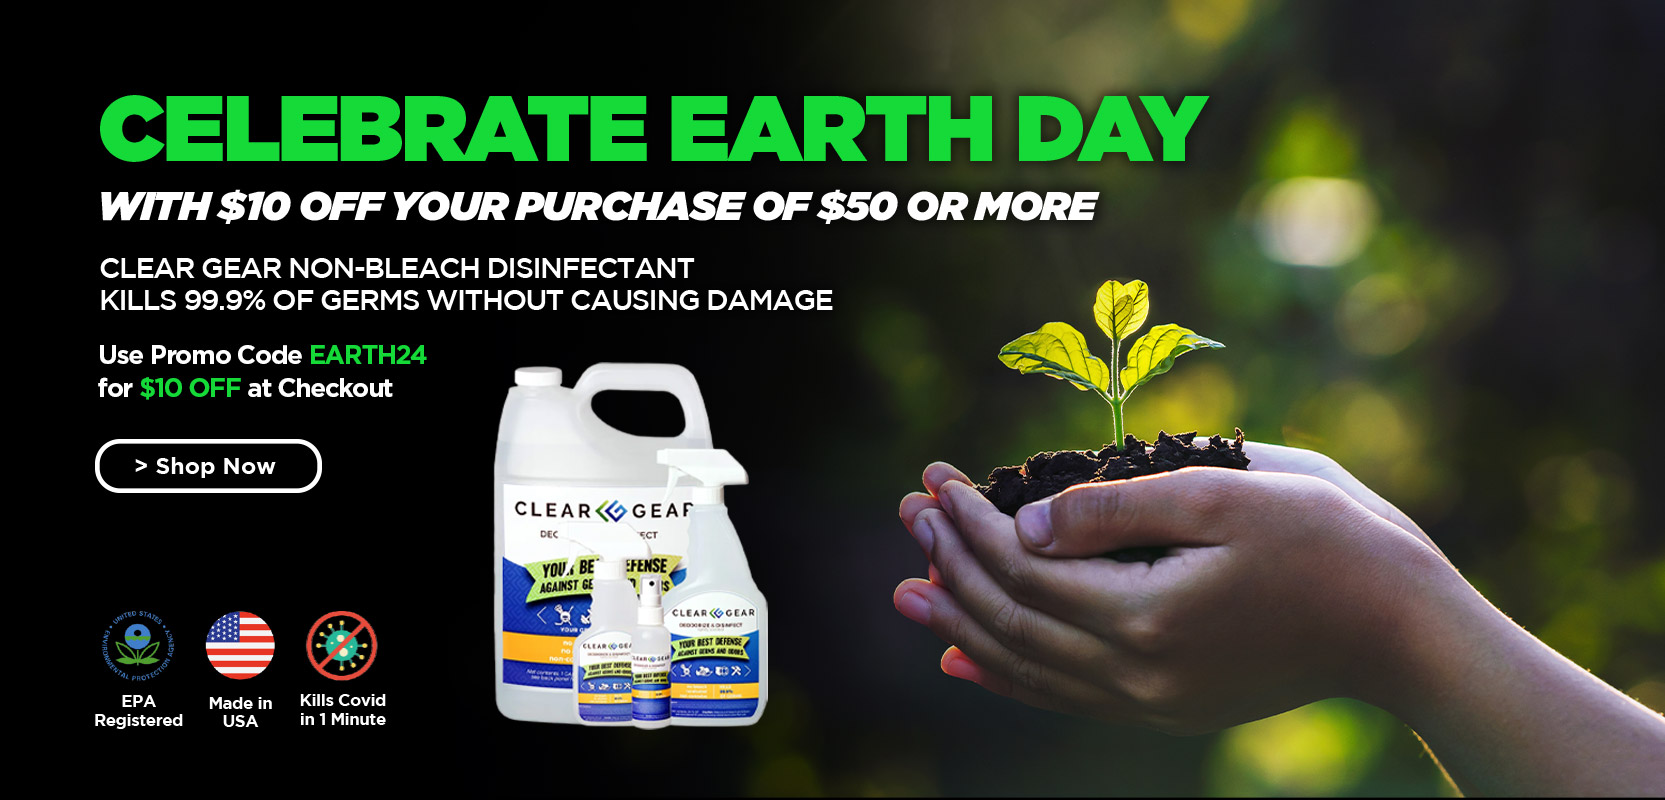 Use promo code EARTH24 for $10 off